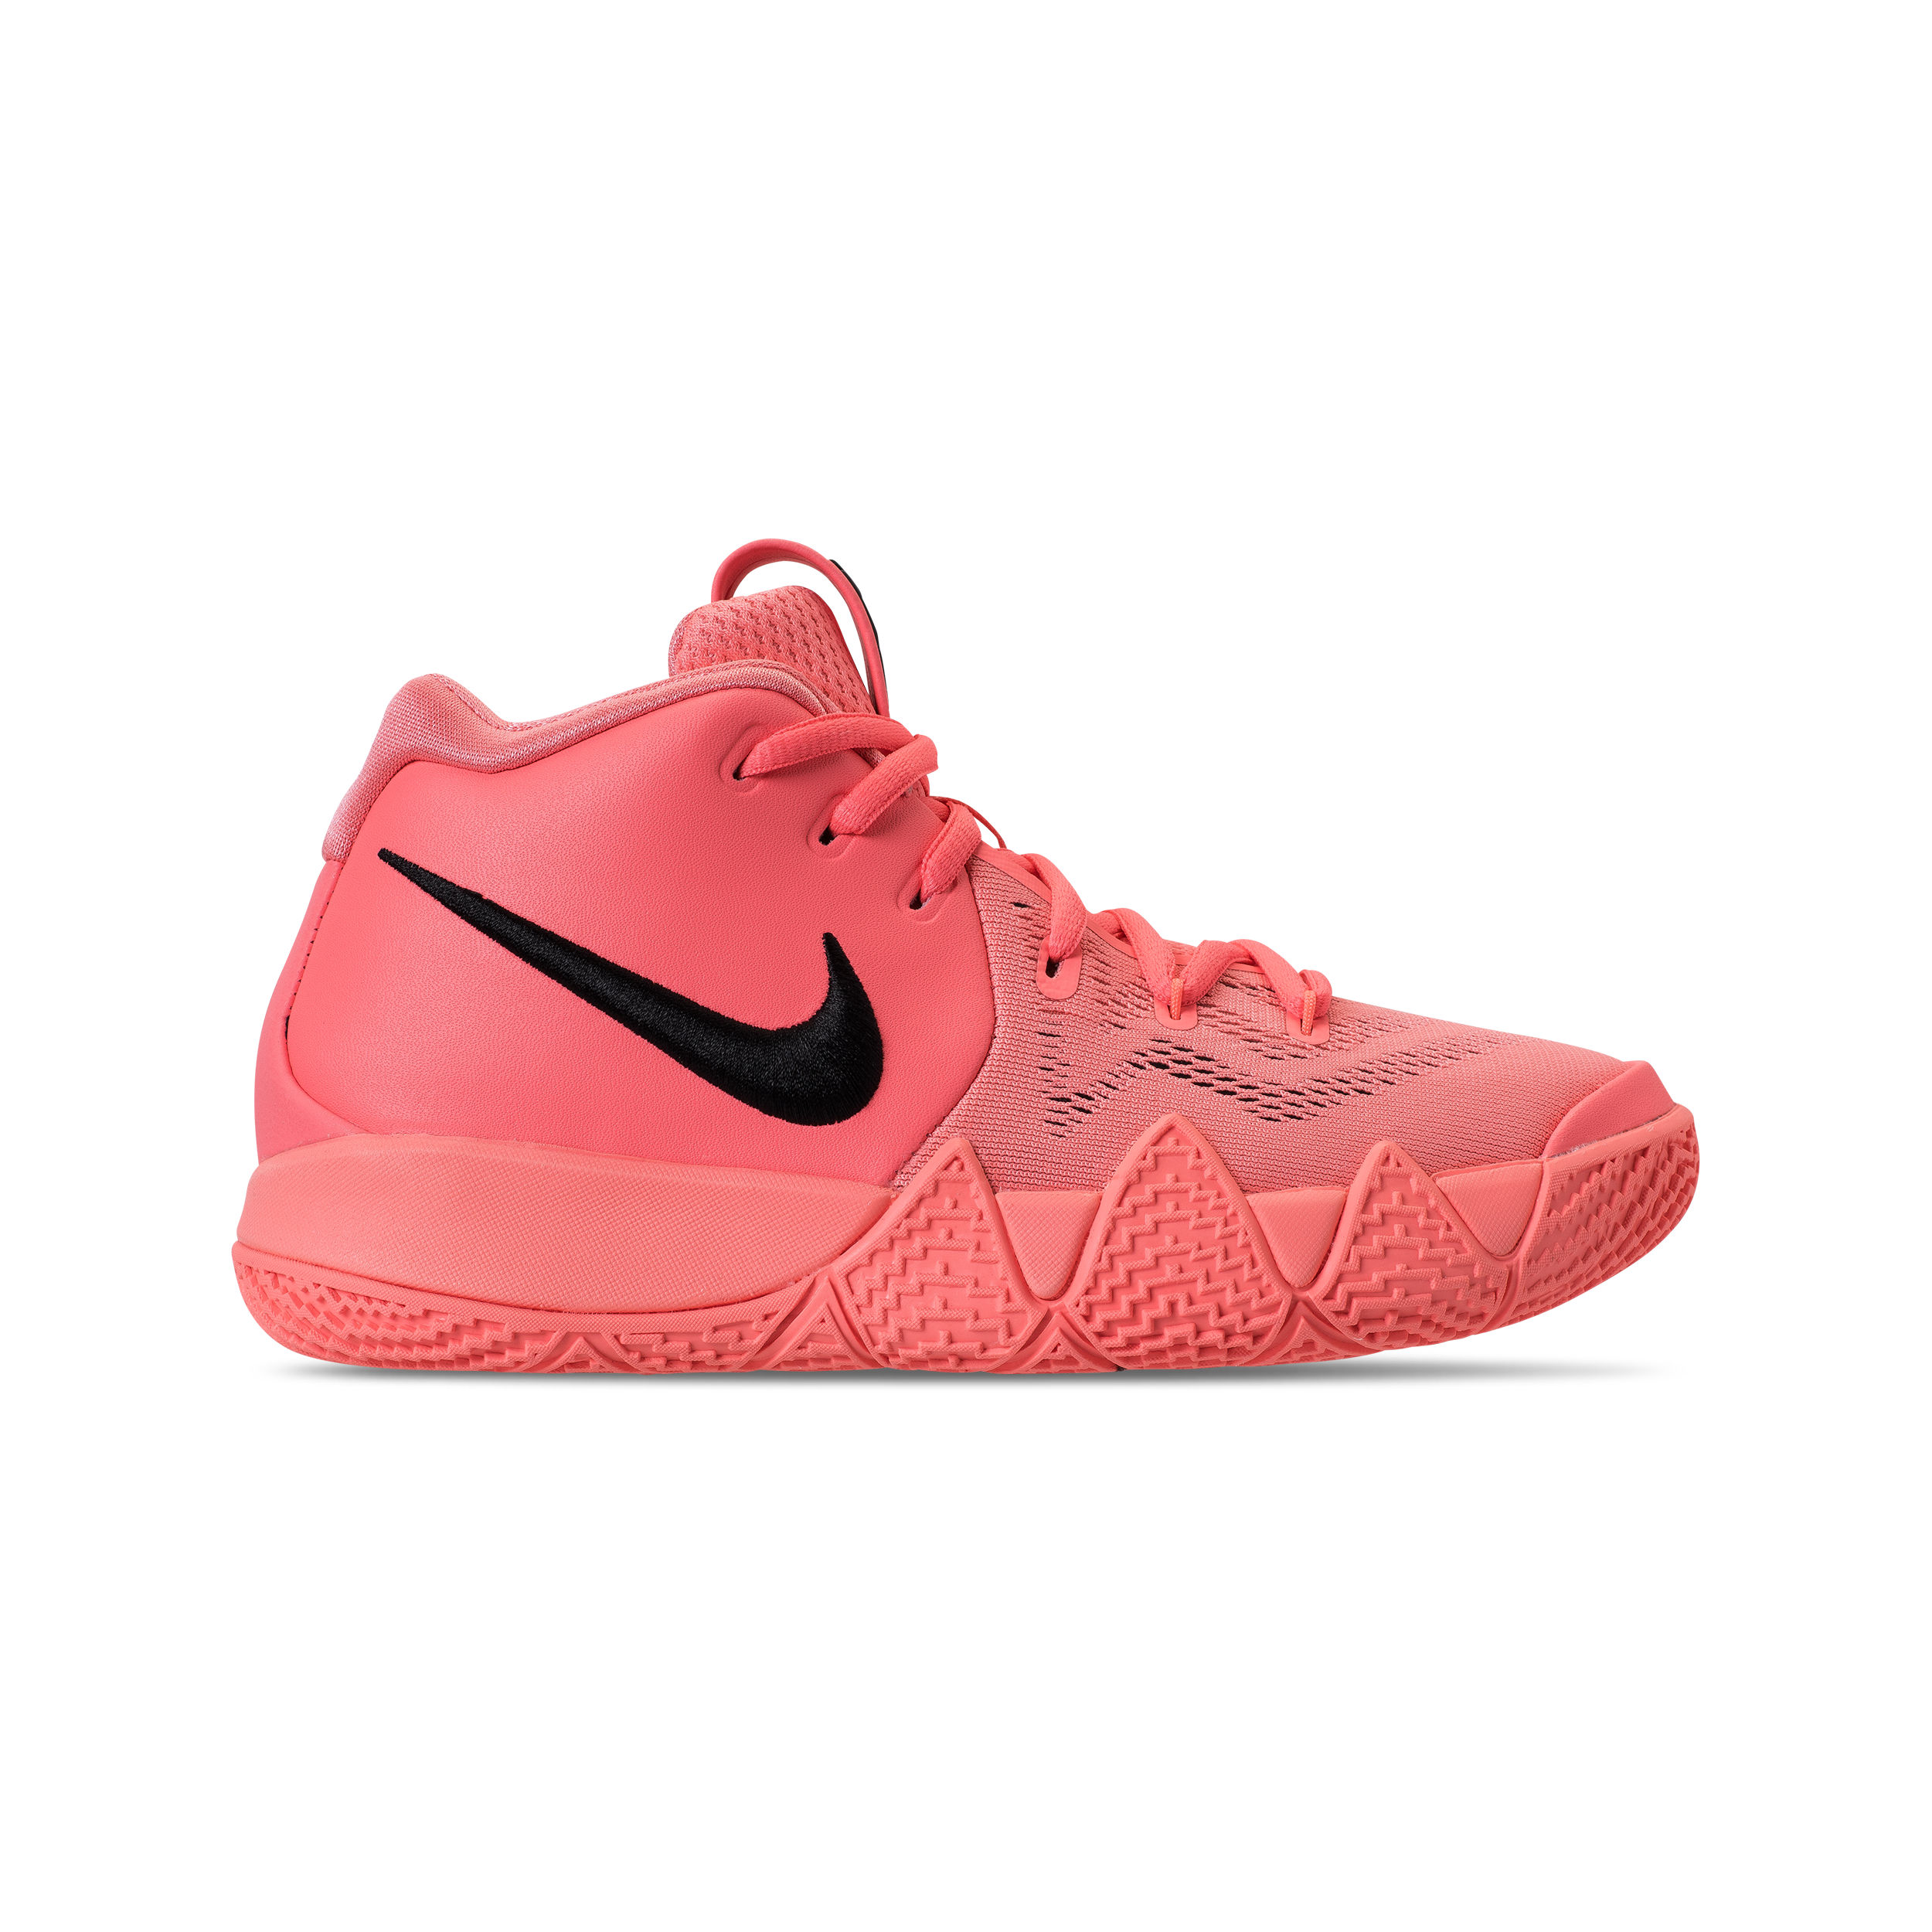 kyrie 4 all pink